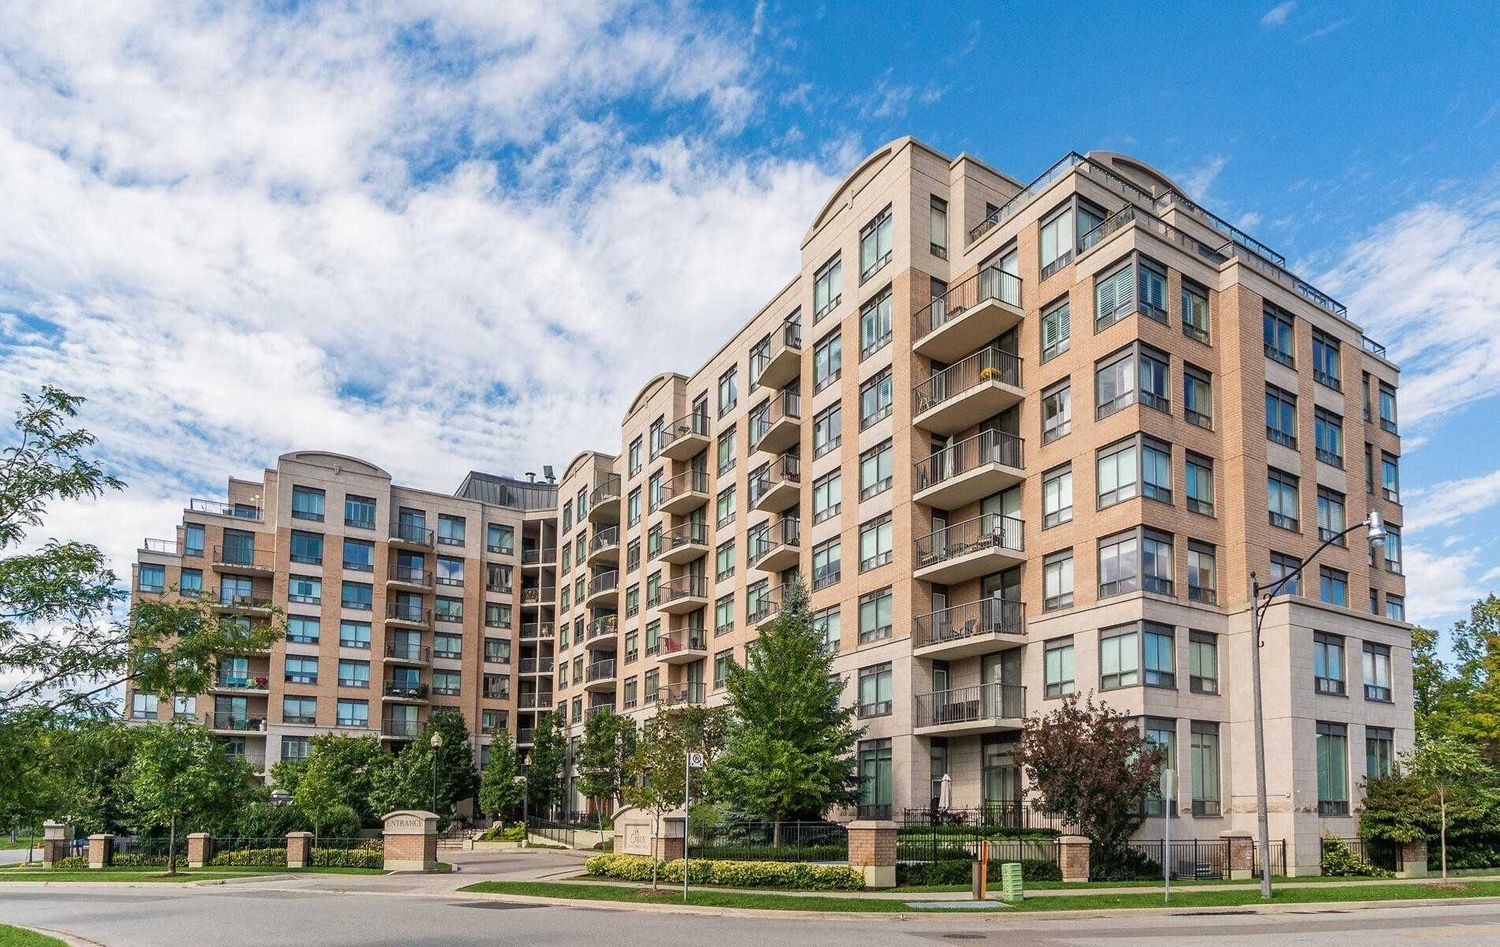 16 Dallimore Circ. Savoy at Camelot Condos is located in  North York, Toronto - image #1 of 3